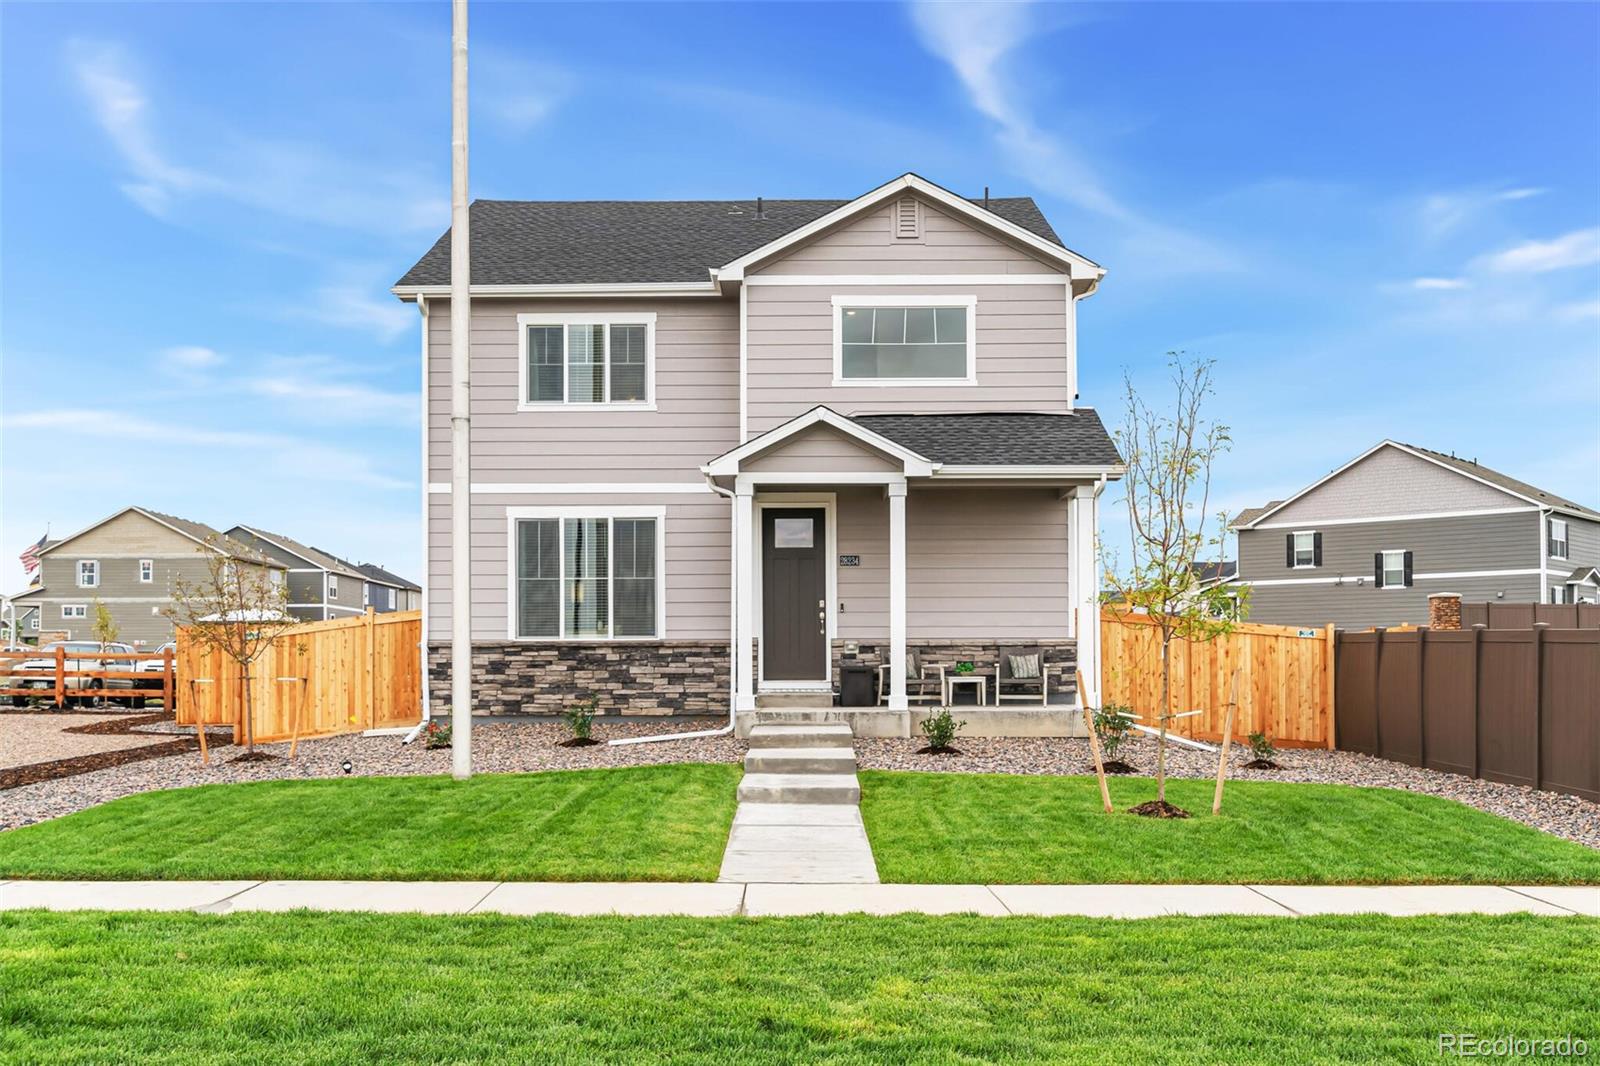 Report Image for 28346 E 8th Place,Watkins, Colorado